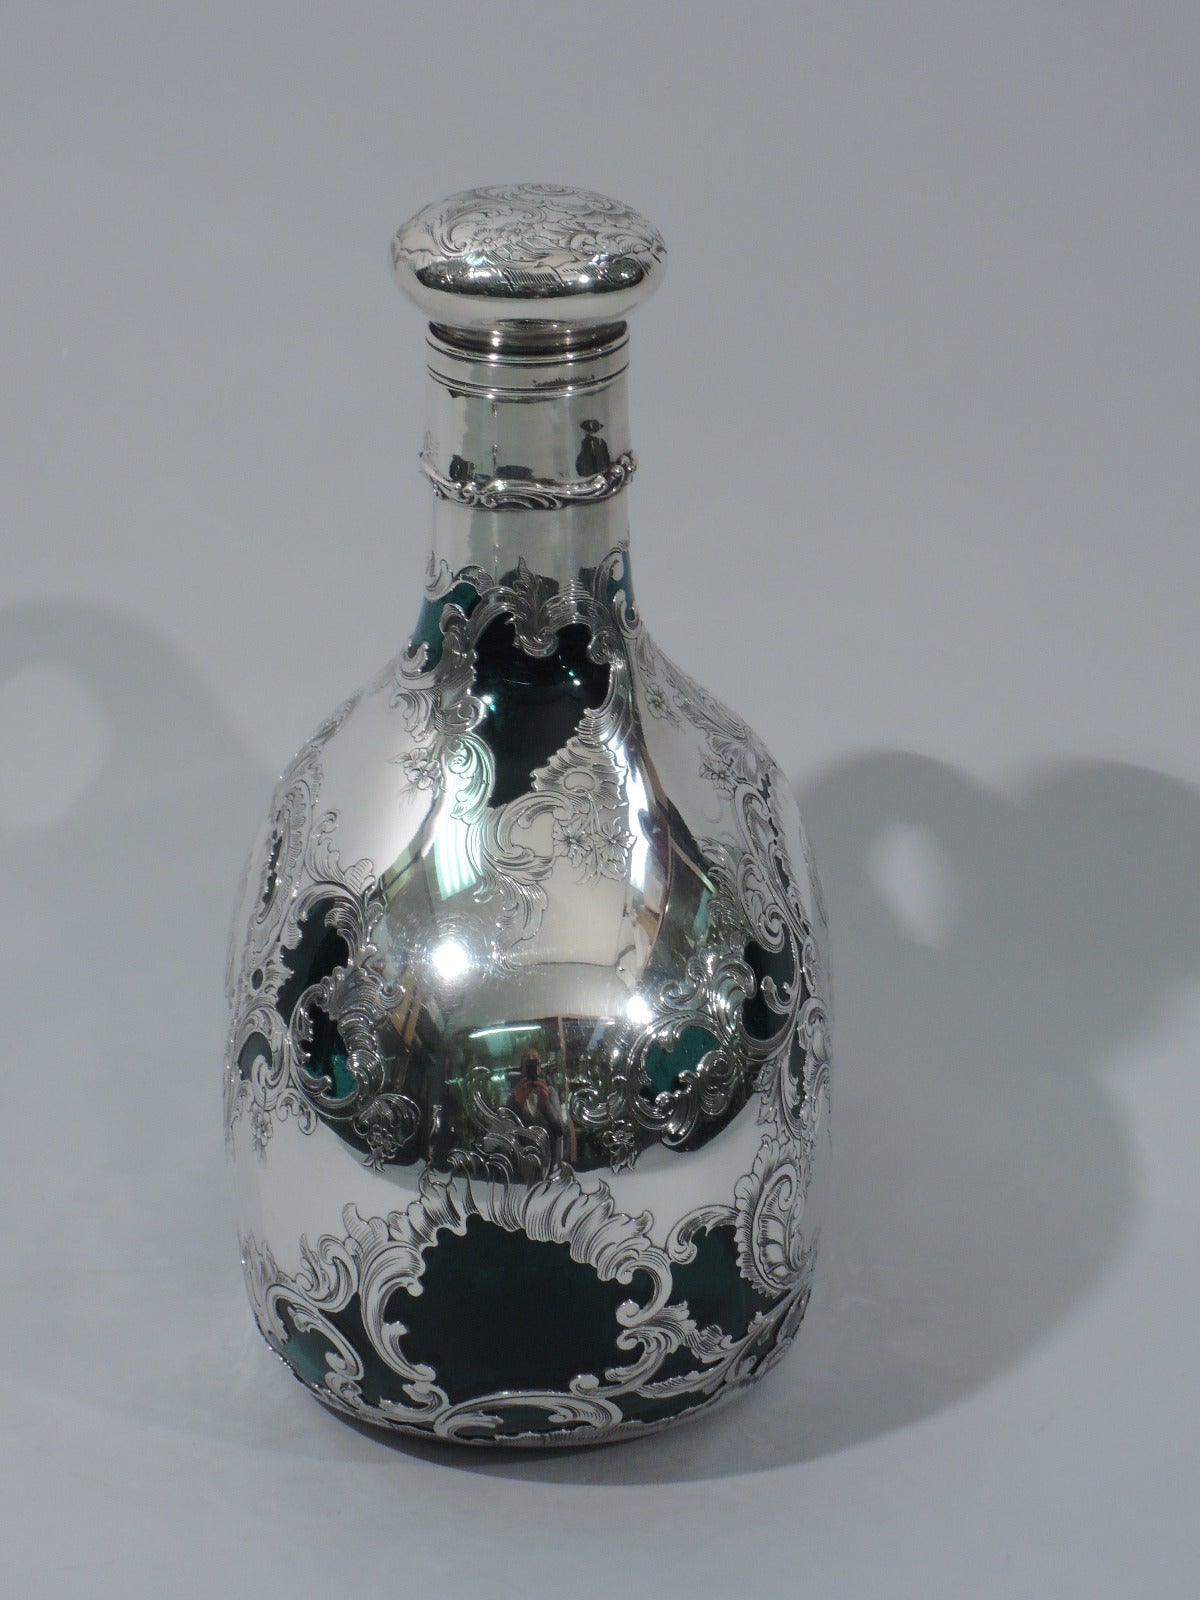 Art Nouveau Antique Gorham Jug Decanter in Emerald Glass with Silver Overlay